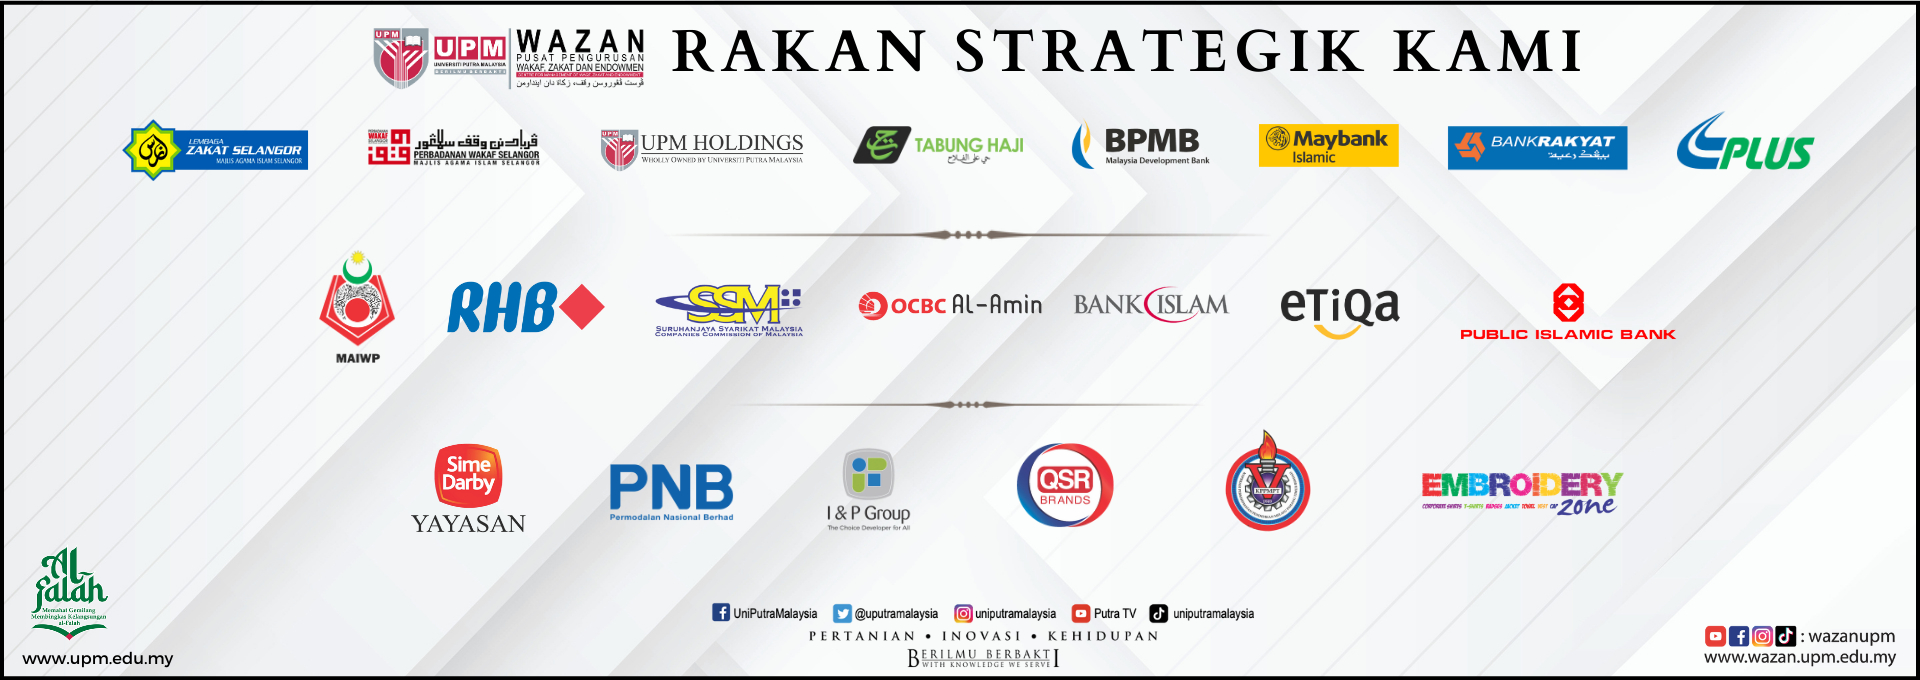 OUR STRATEGIC PARTNERS